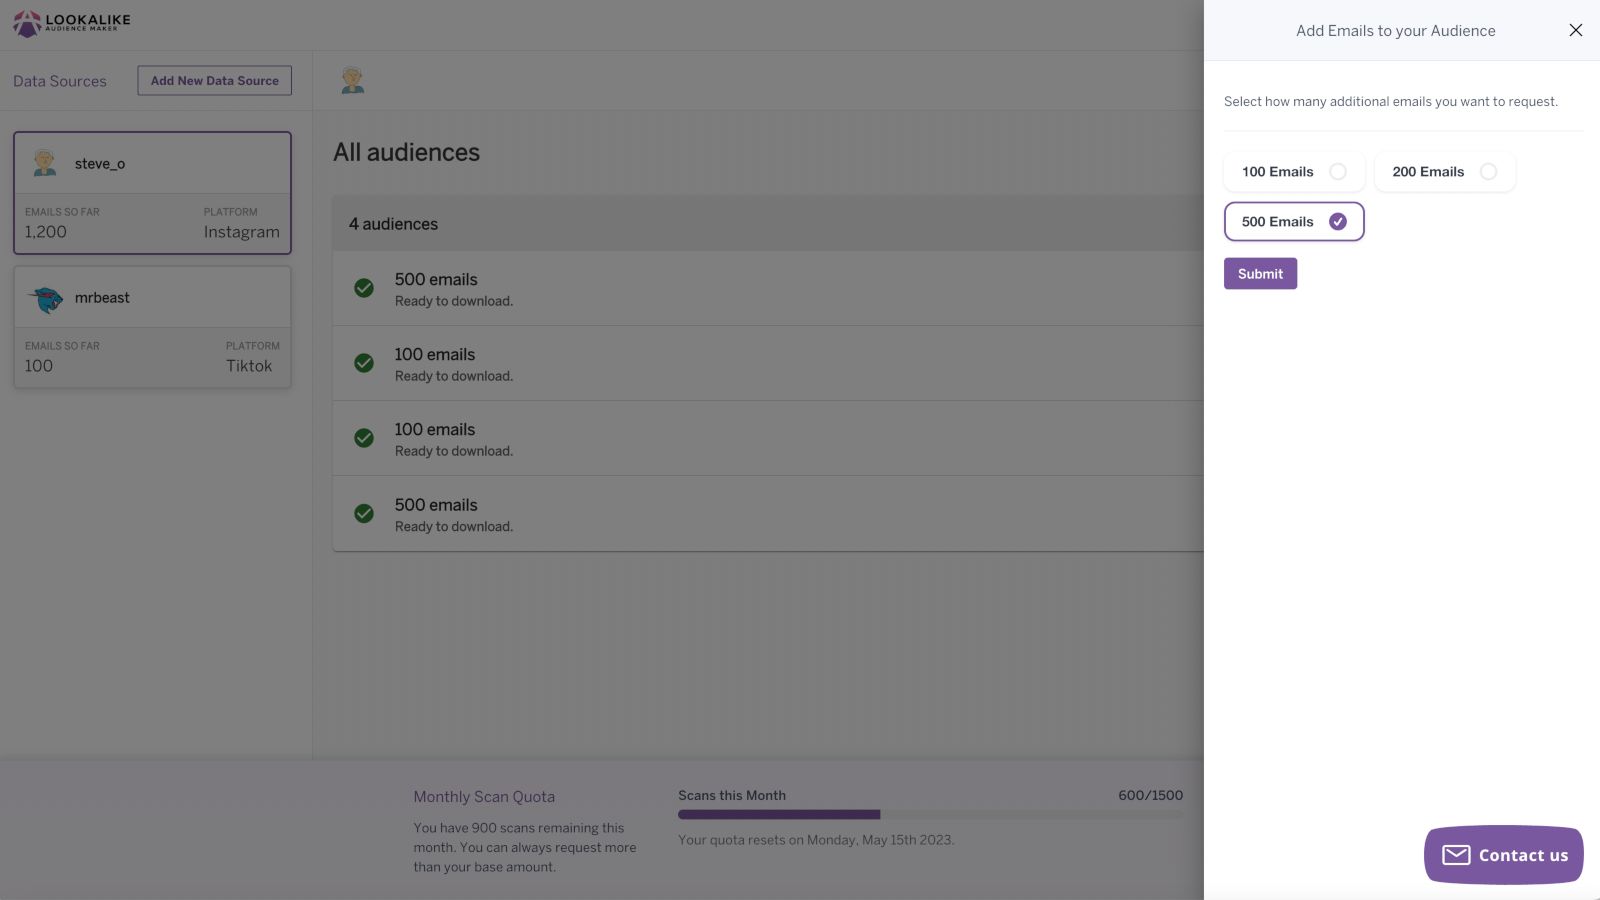 Solicitar mais e-mails no Lookalike Audience Maker